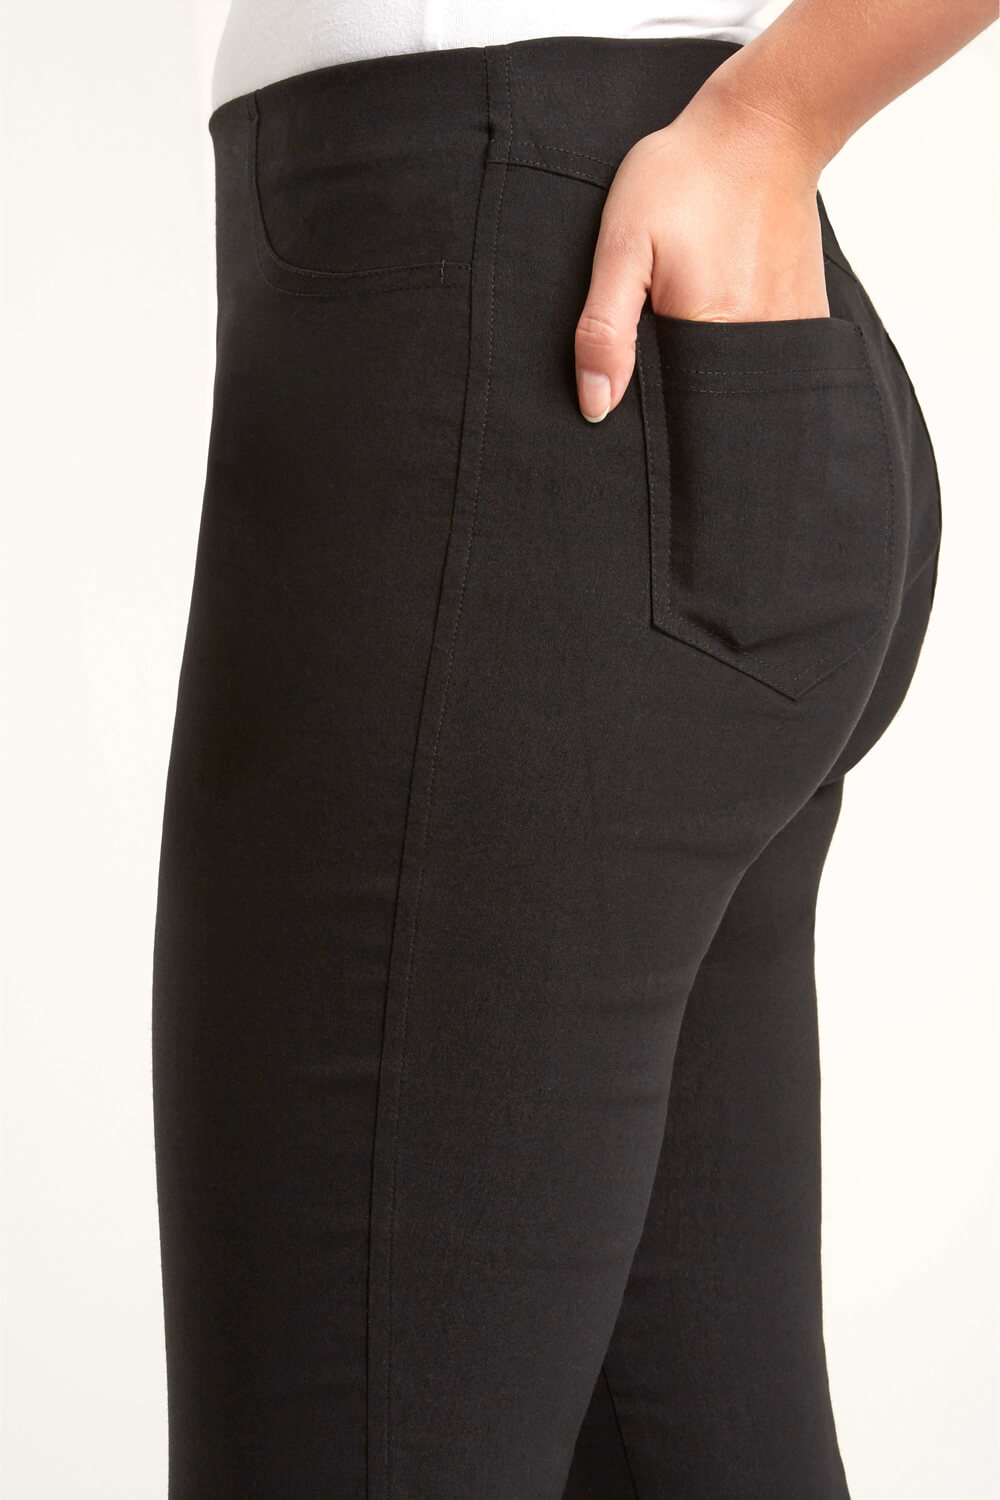 Black 3/4 Length Stretch Trouser, Image 3 of 4